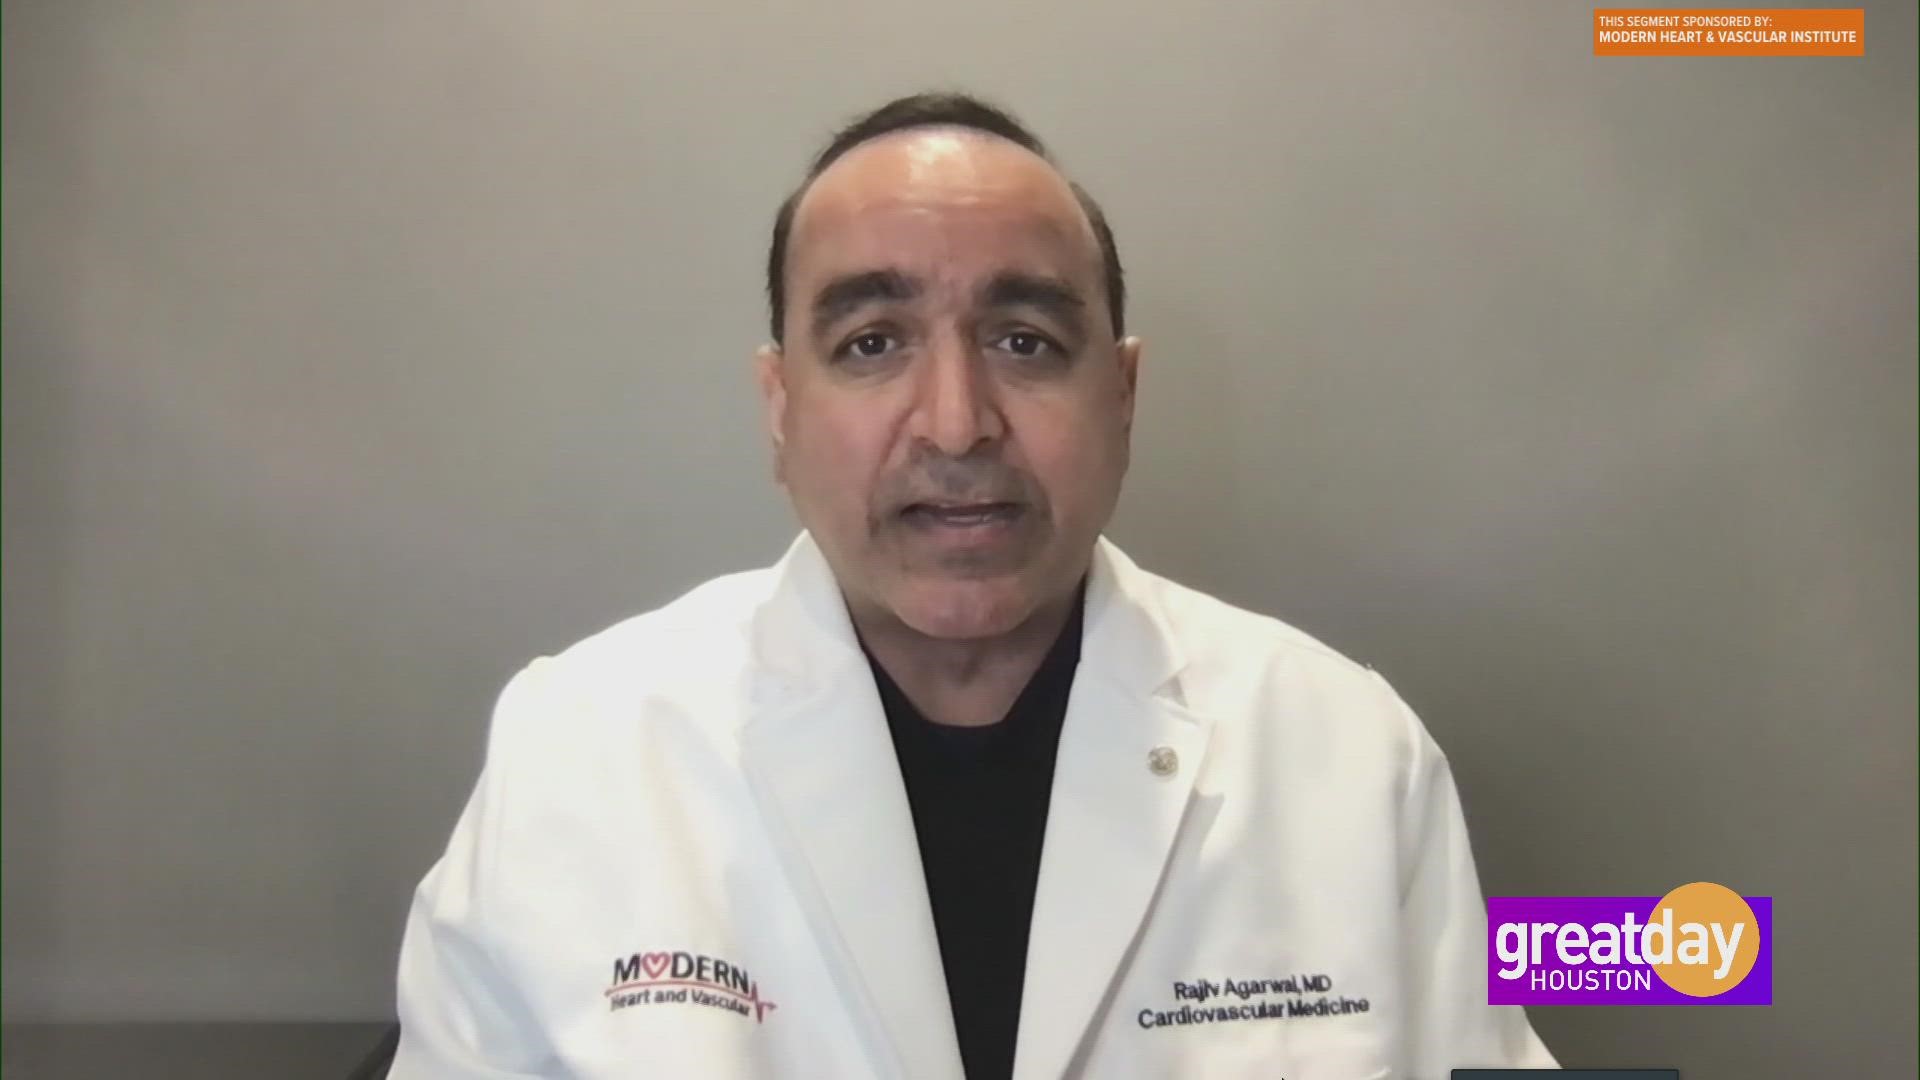 Dr. Rajiv Agarwal with Modern Heart & Vascular discusses treating circulation problems before they become severe